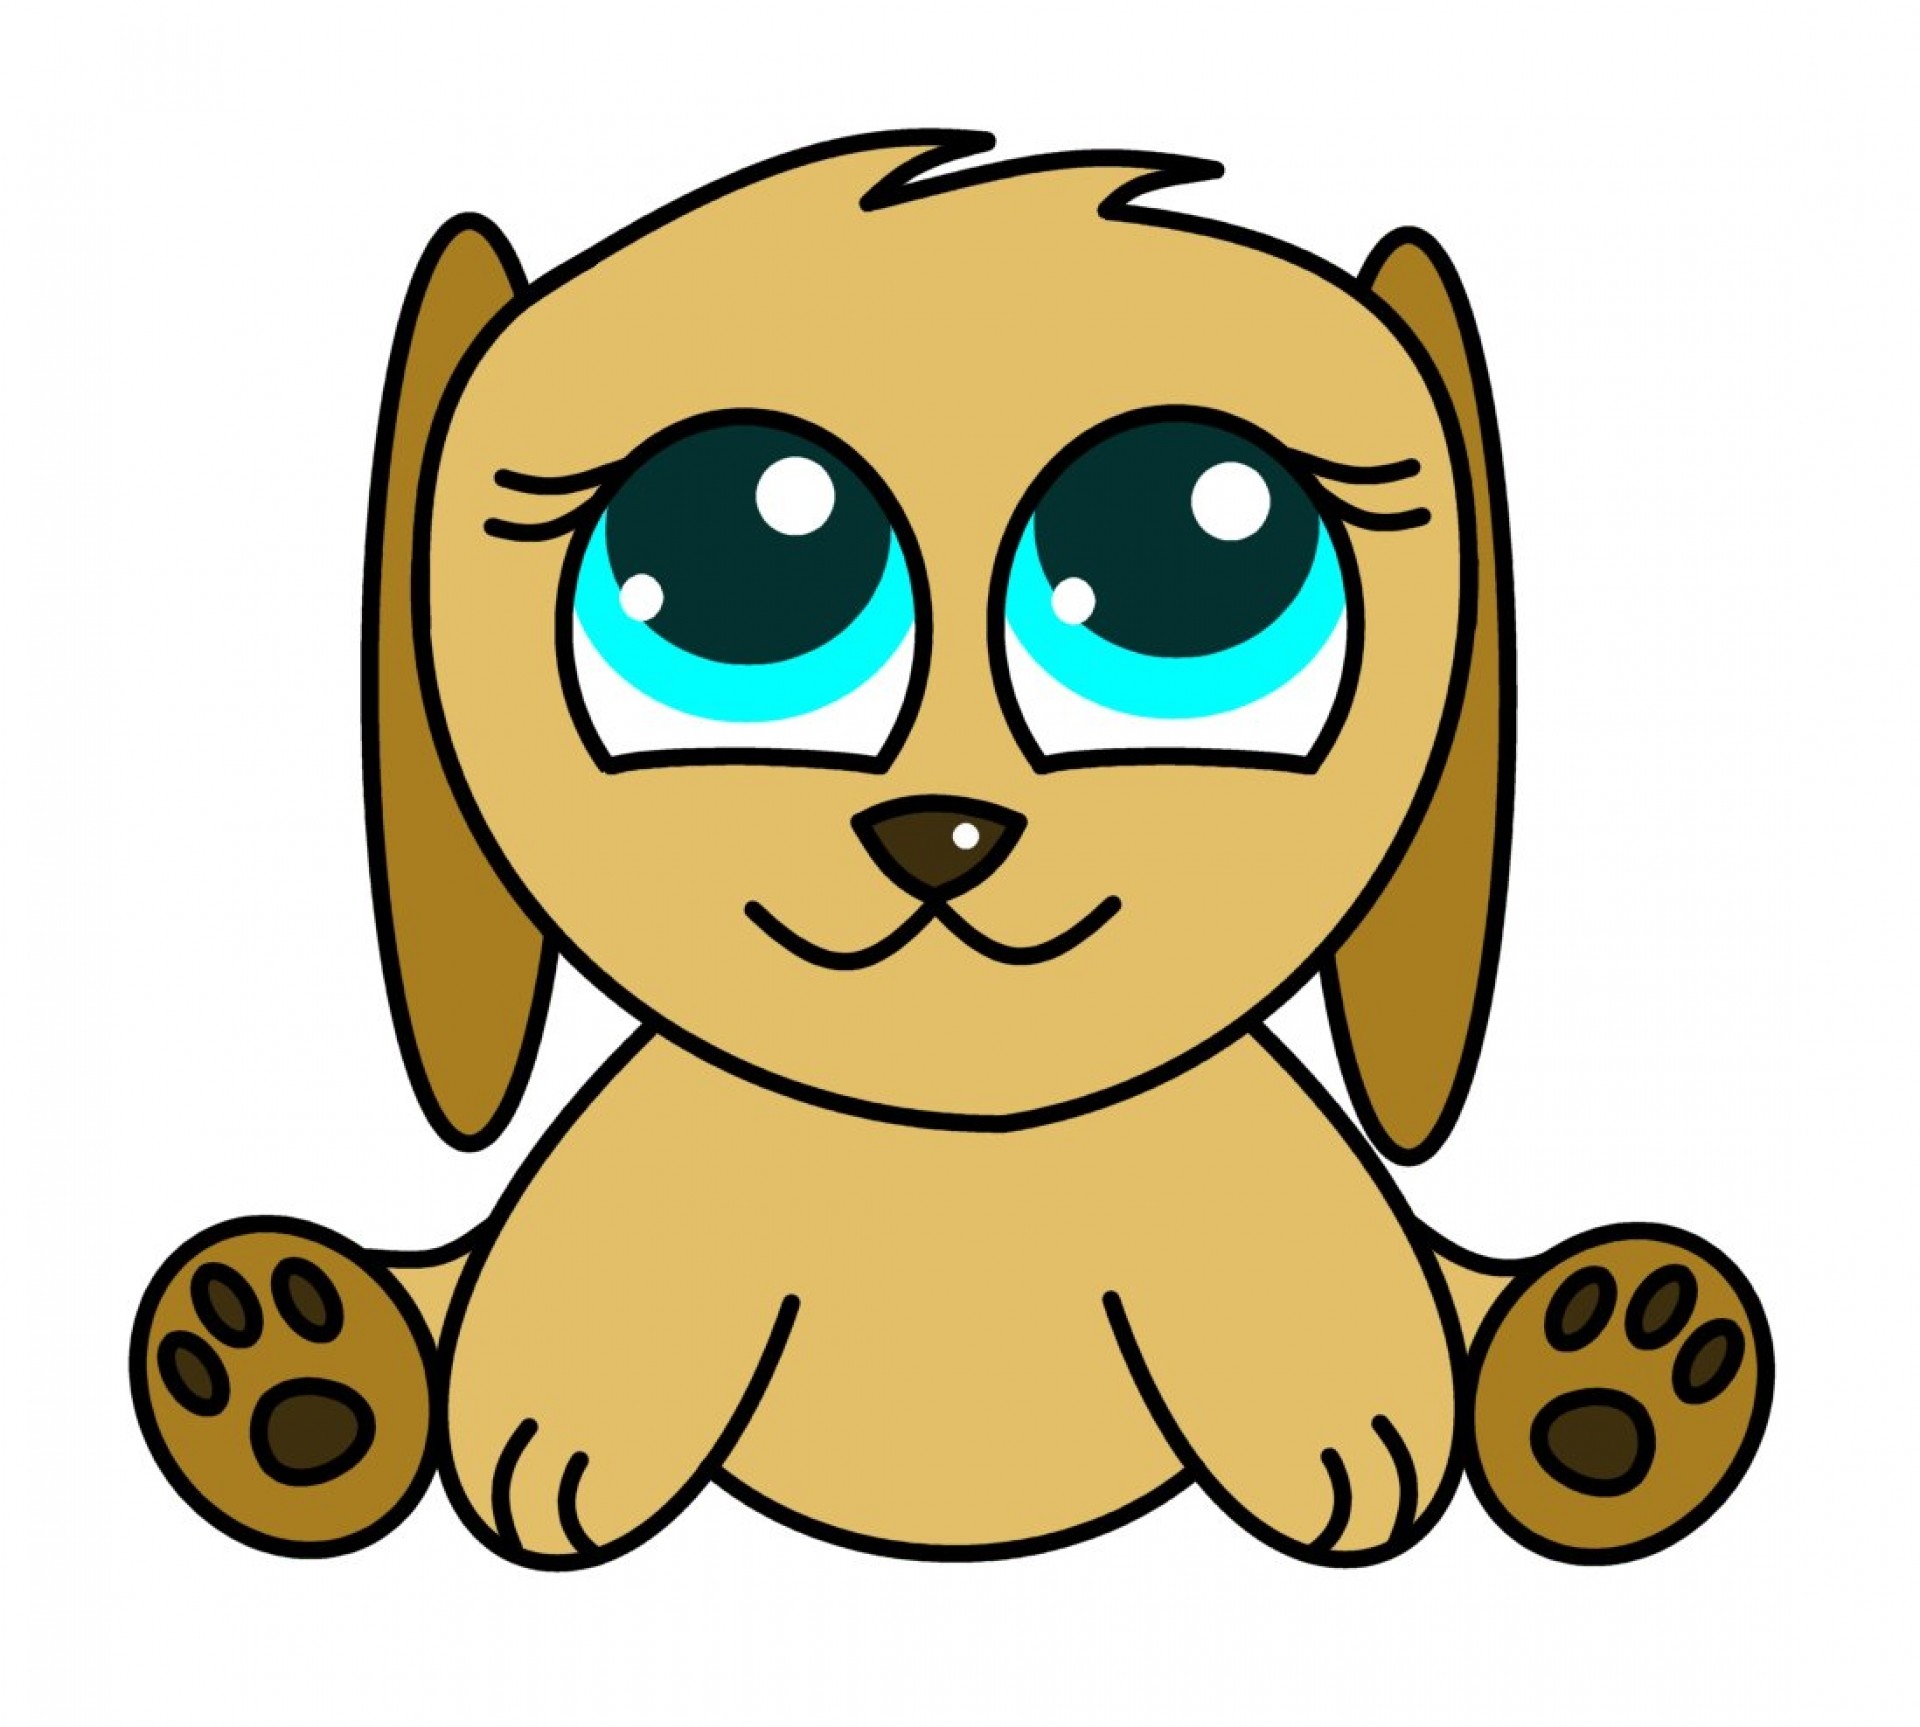 1920x1727 Puppy Cartoons Cute Cartoon Puppy Dogs Cute Cartoon Puppy Kids In Coloring  Pages Draw A Cartoon